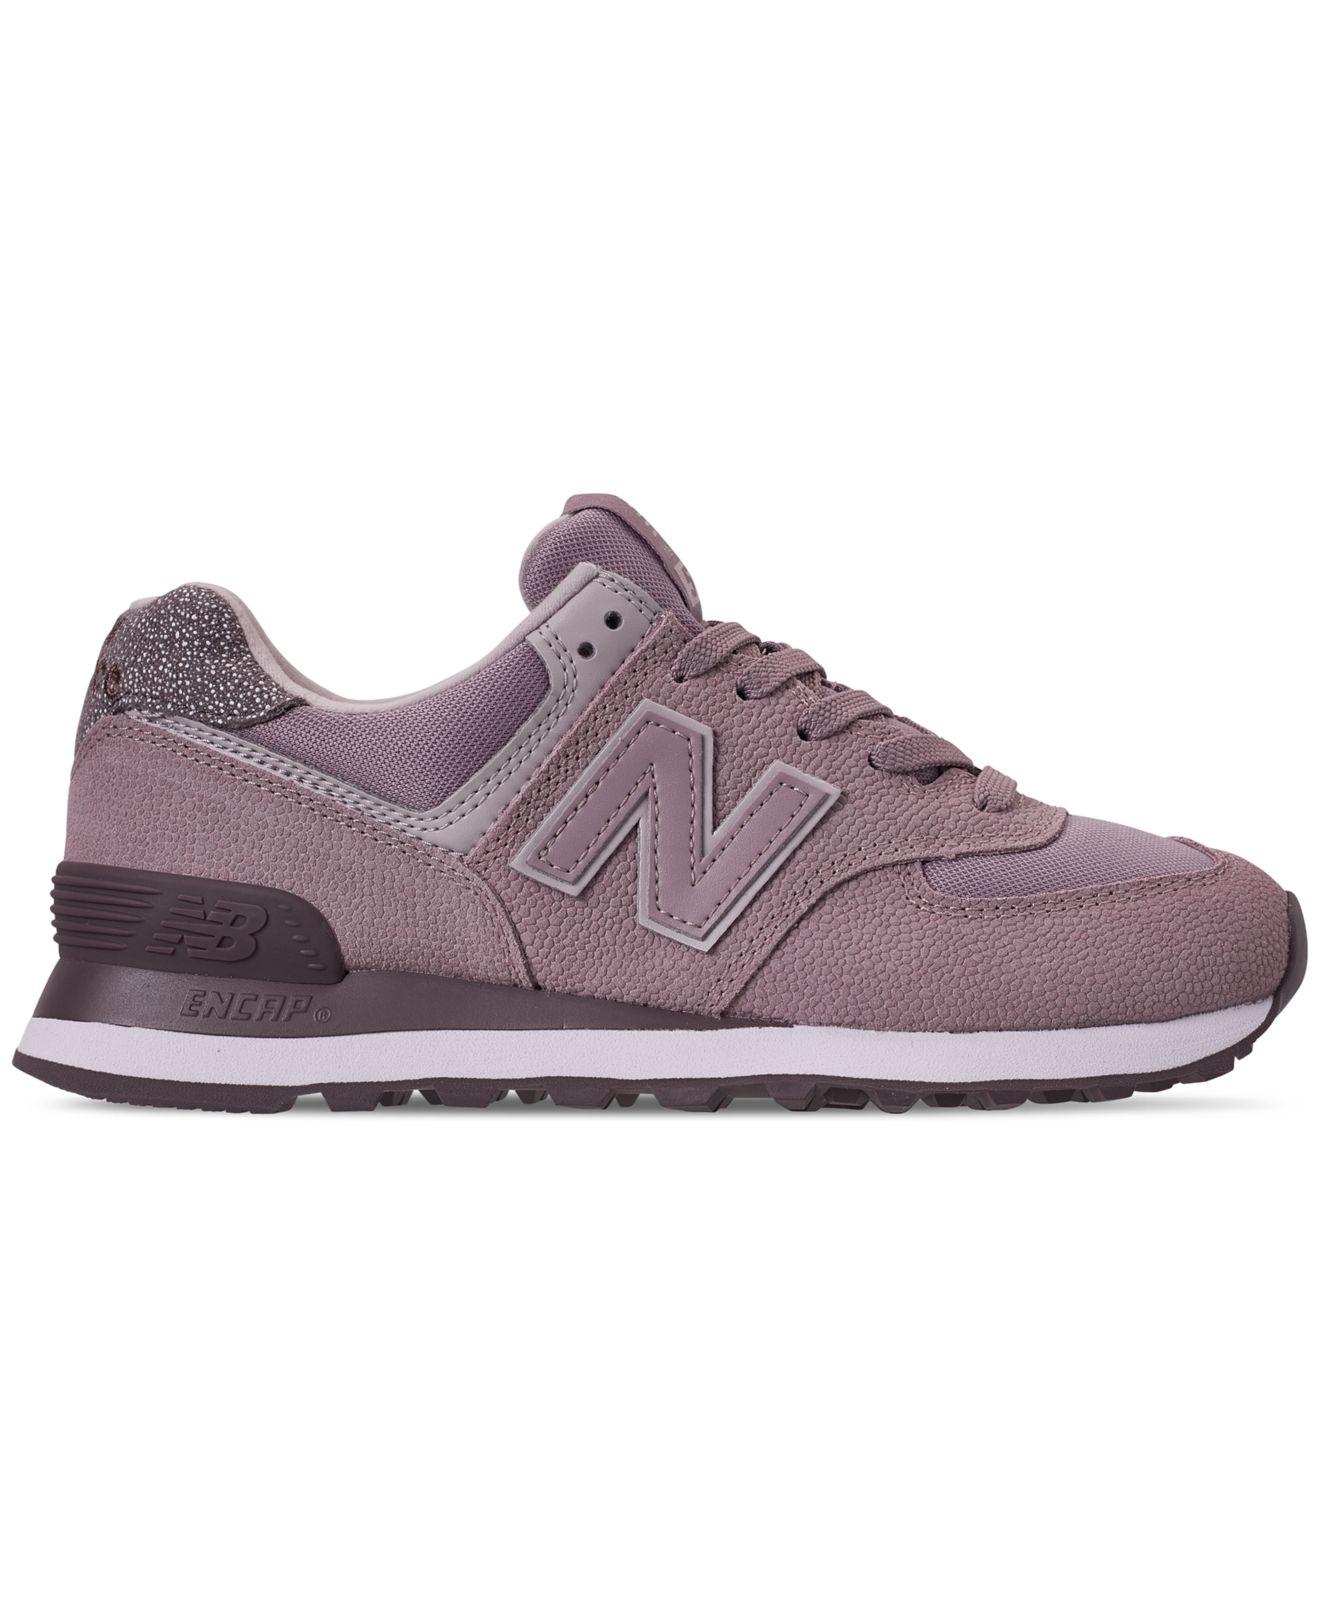 New Balance Suede 574 Pebbled Casual 